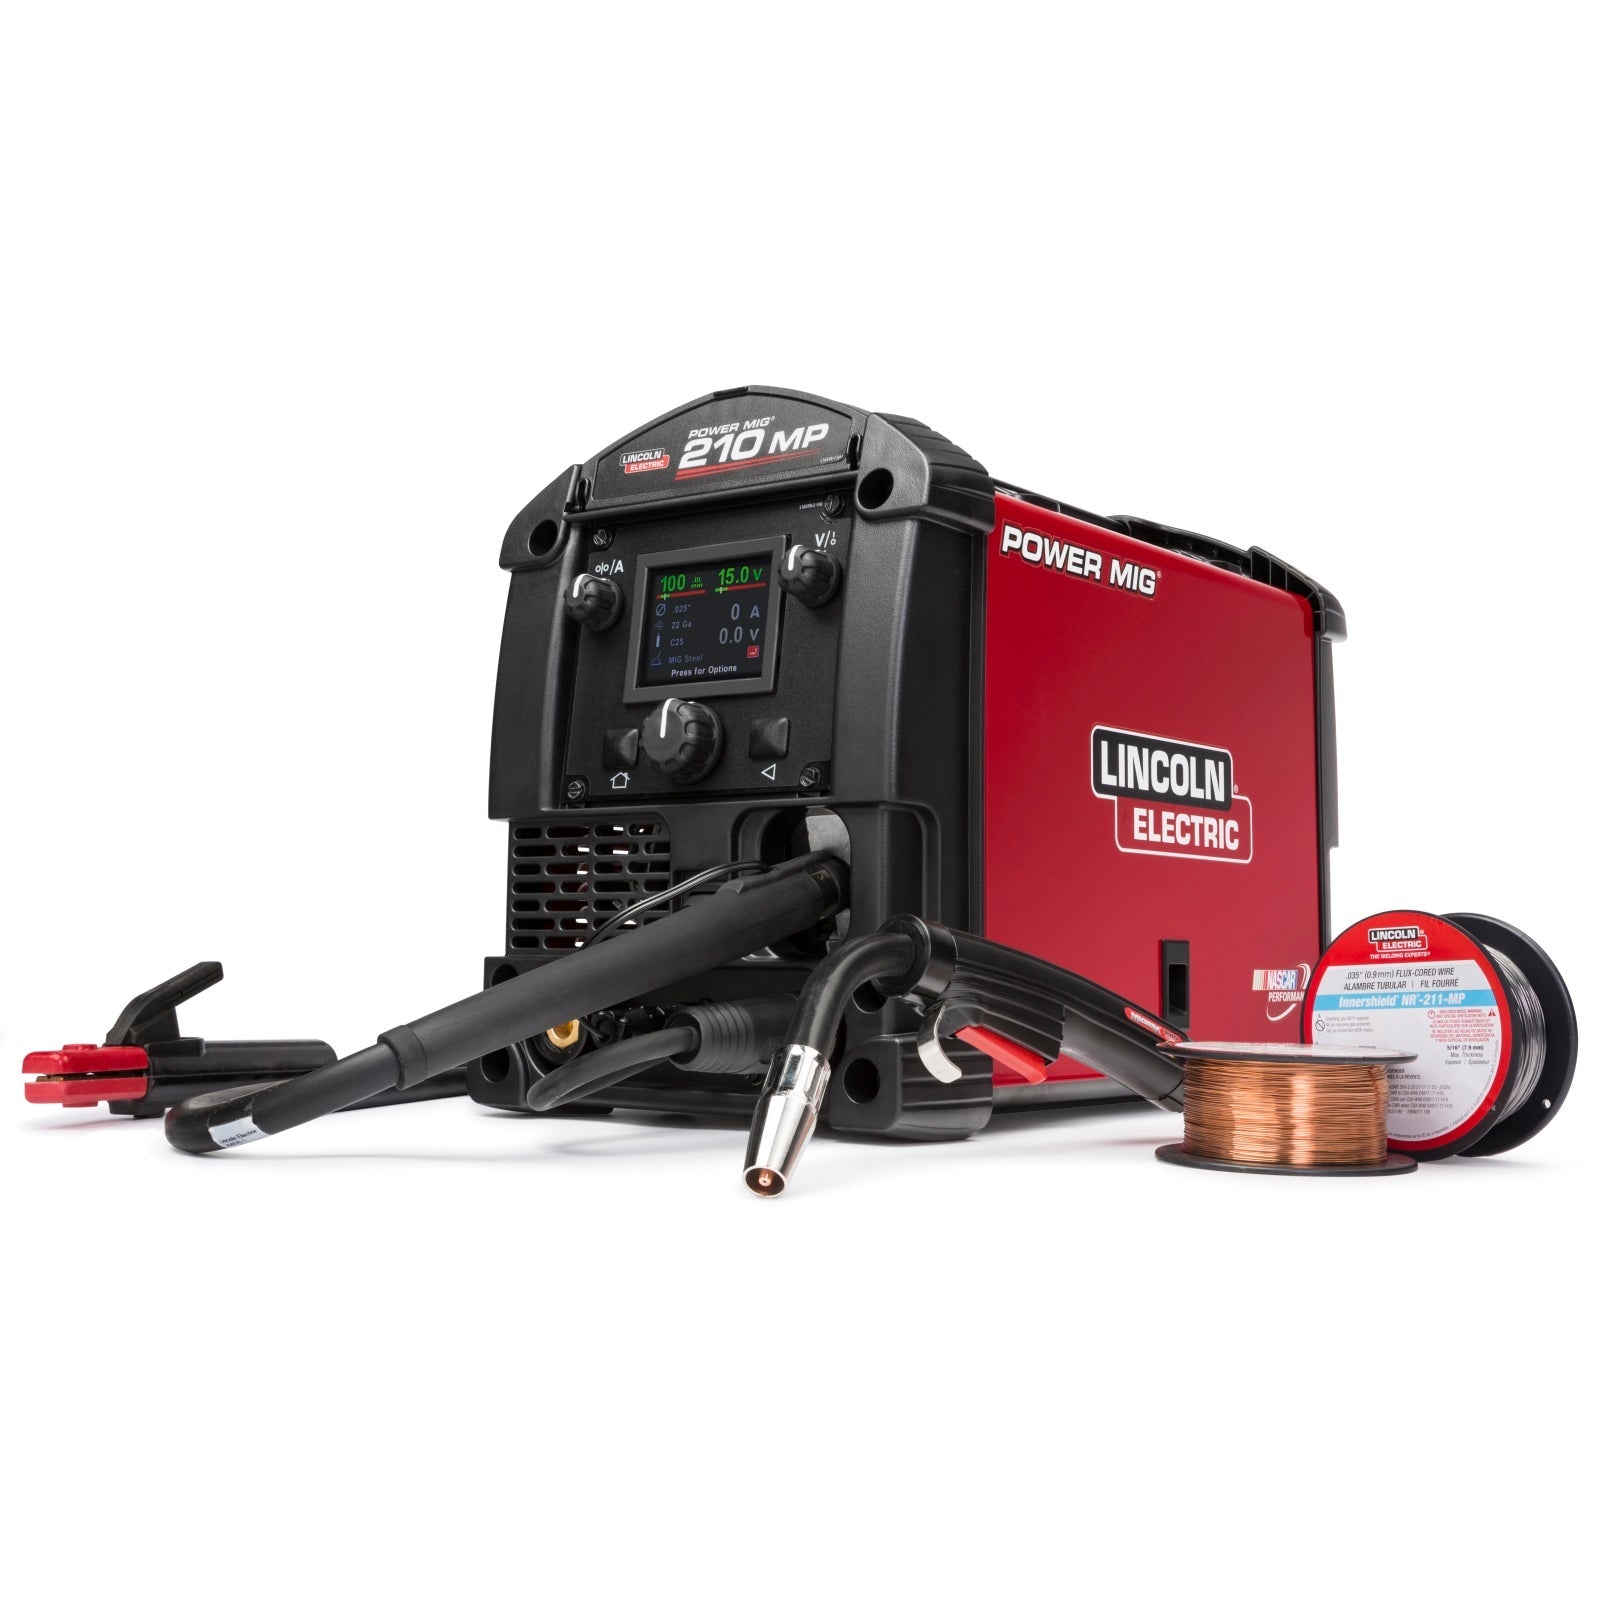 Lincoln Power MIG 210 MP Multi Process Welder with TIG Kit (K4195-2)